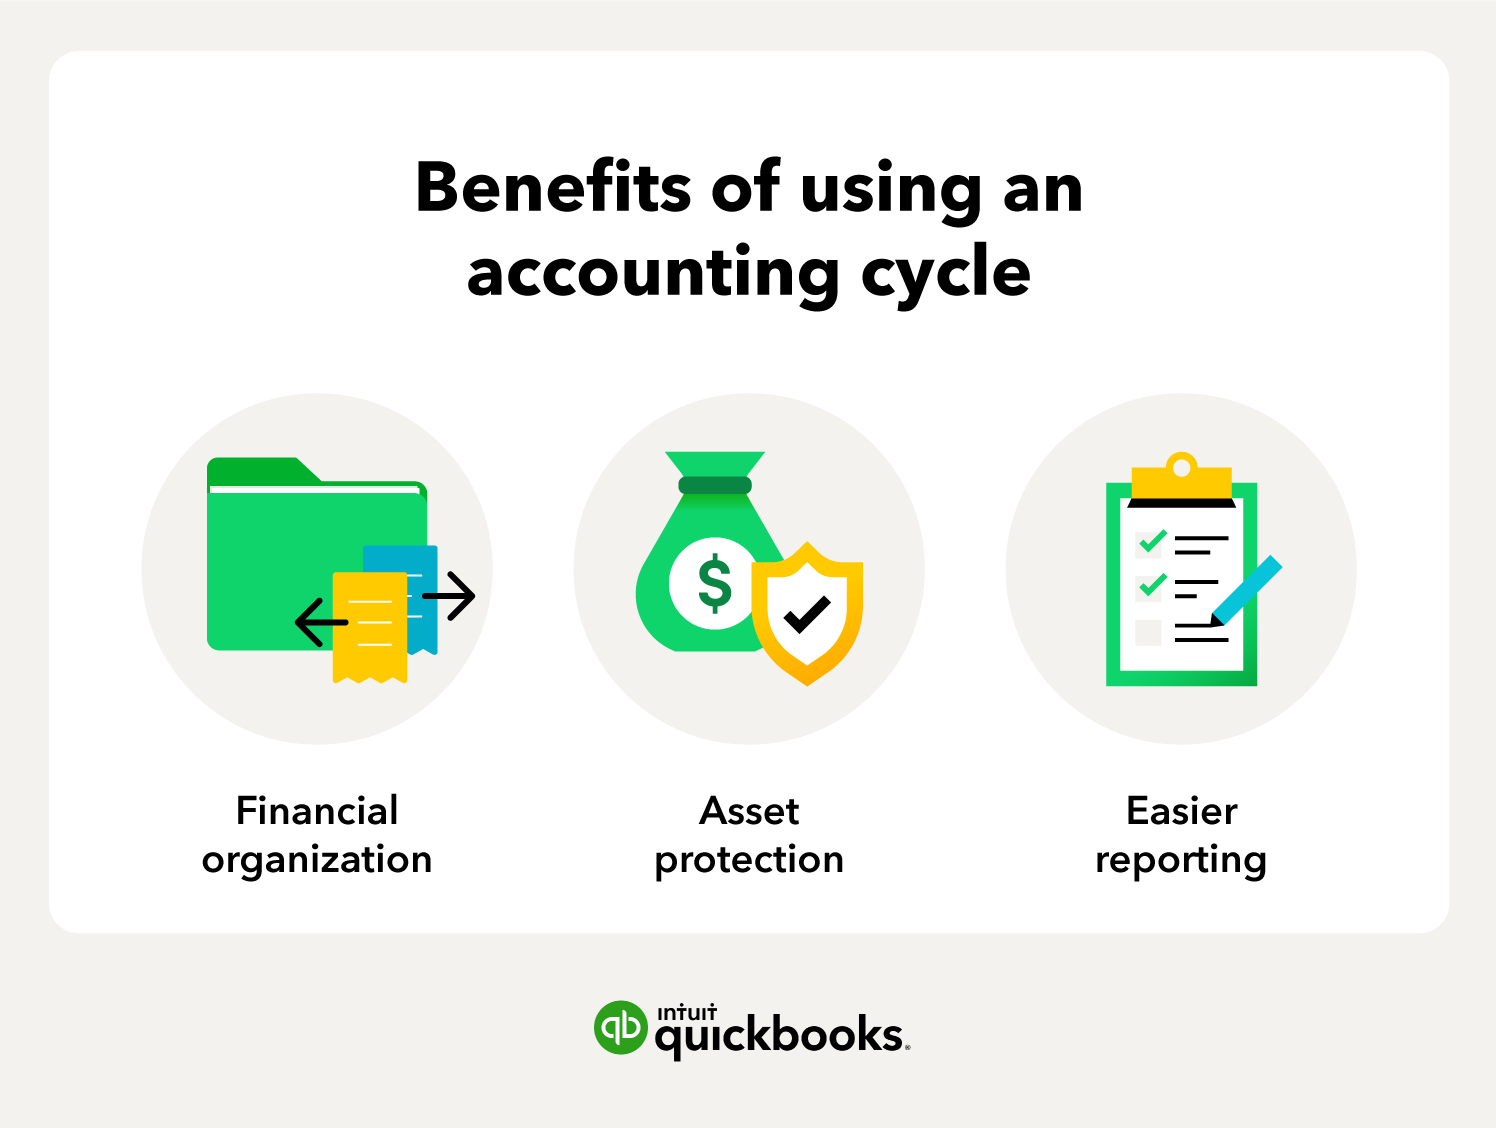 Benefits of using the accounting cycle.